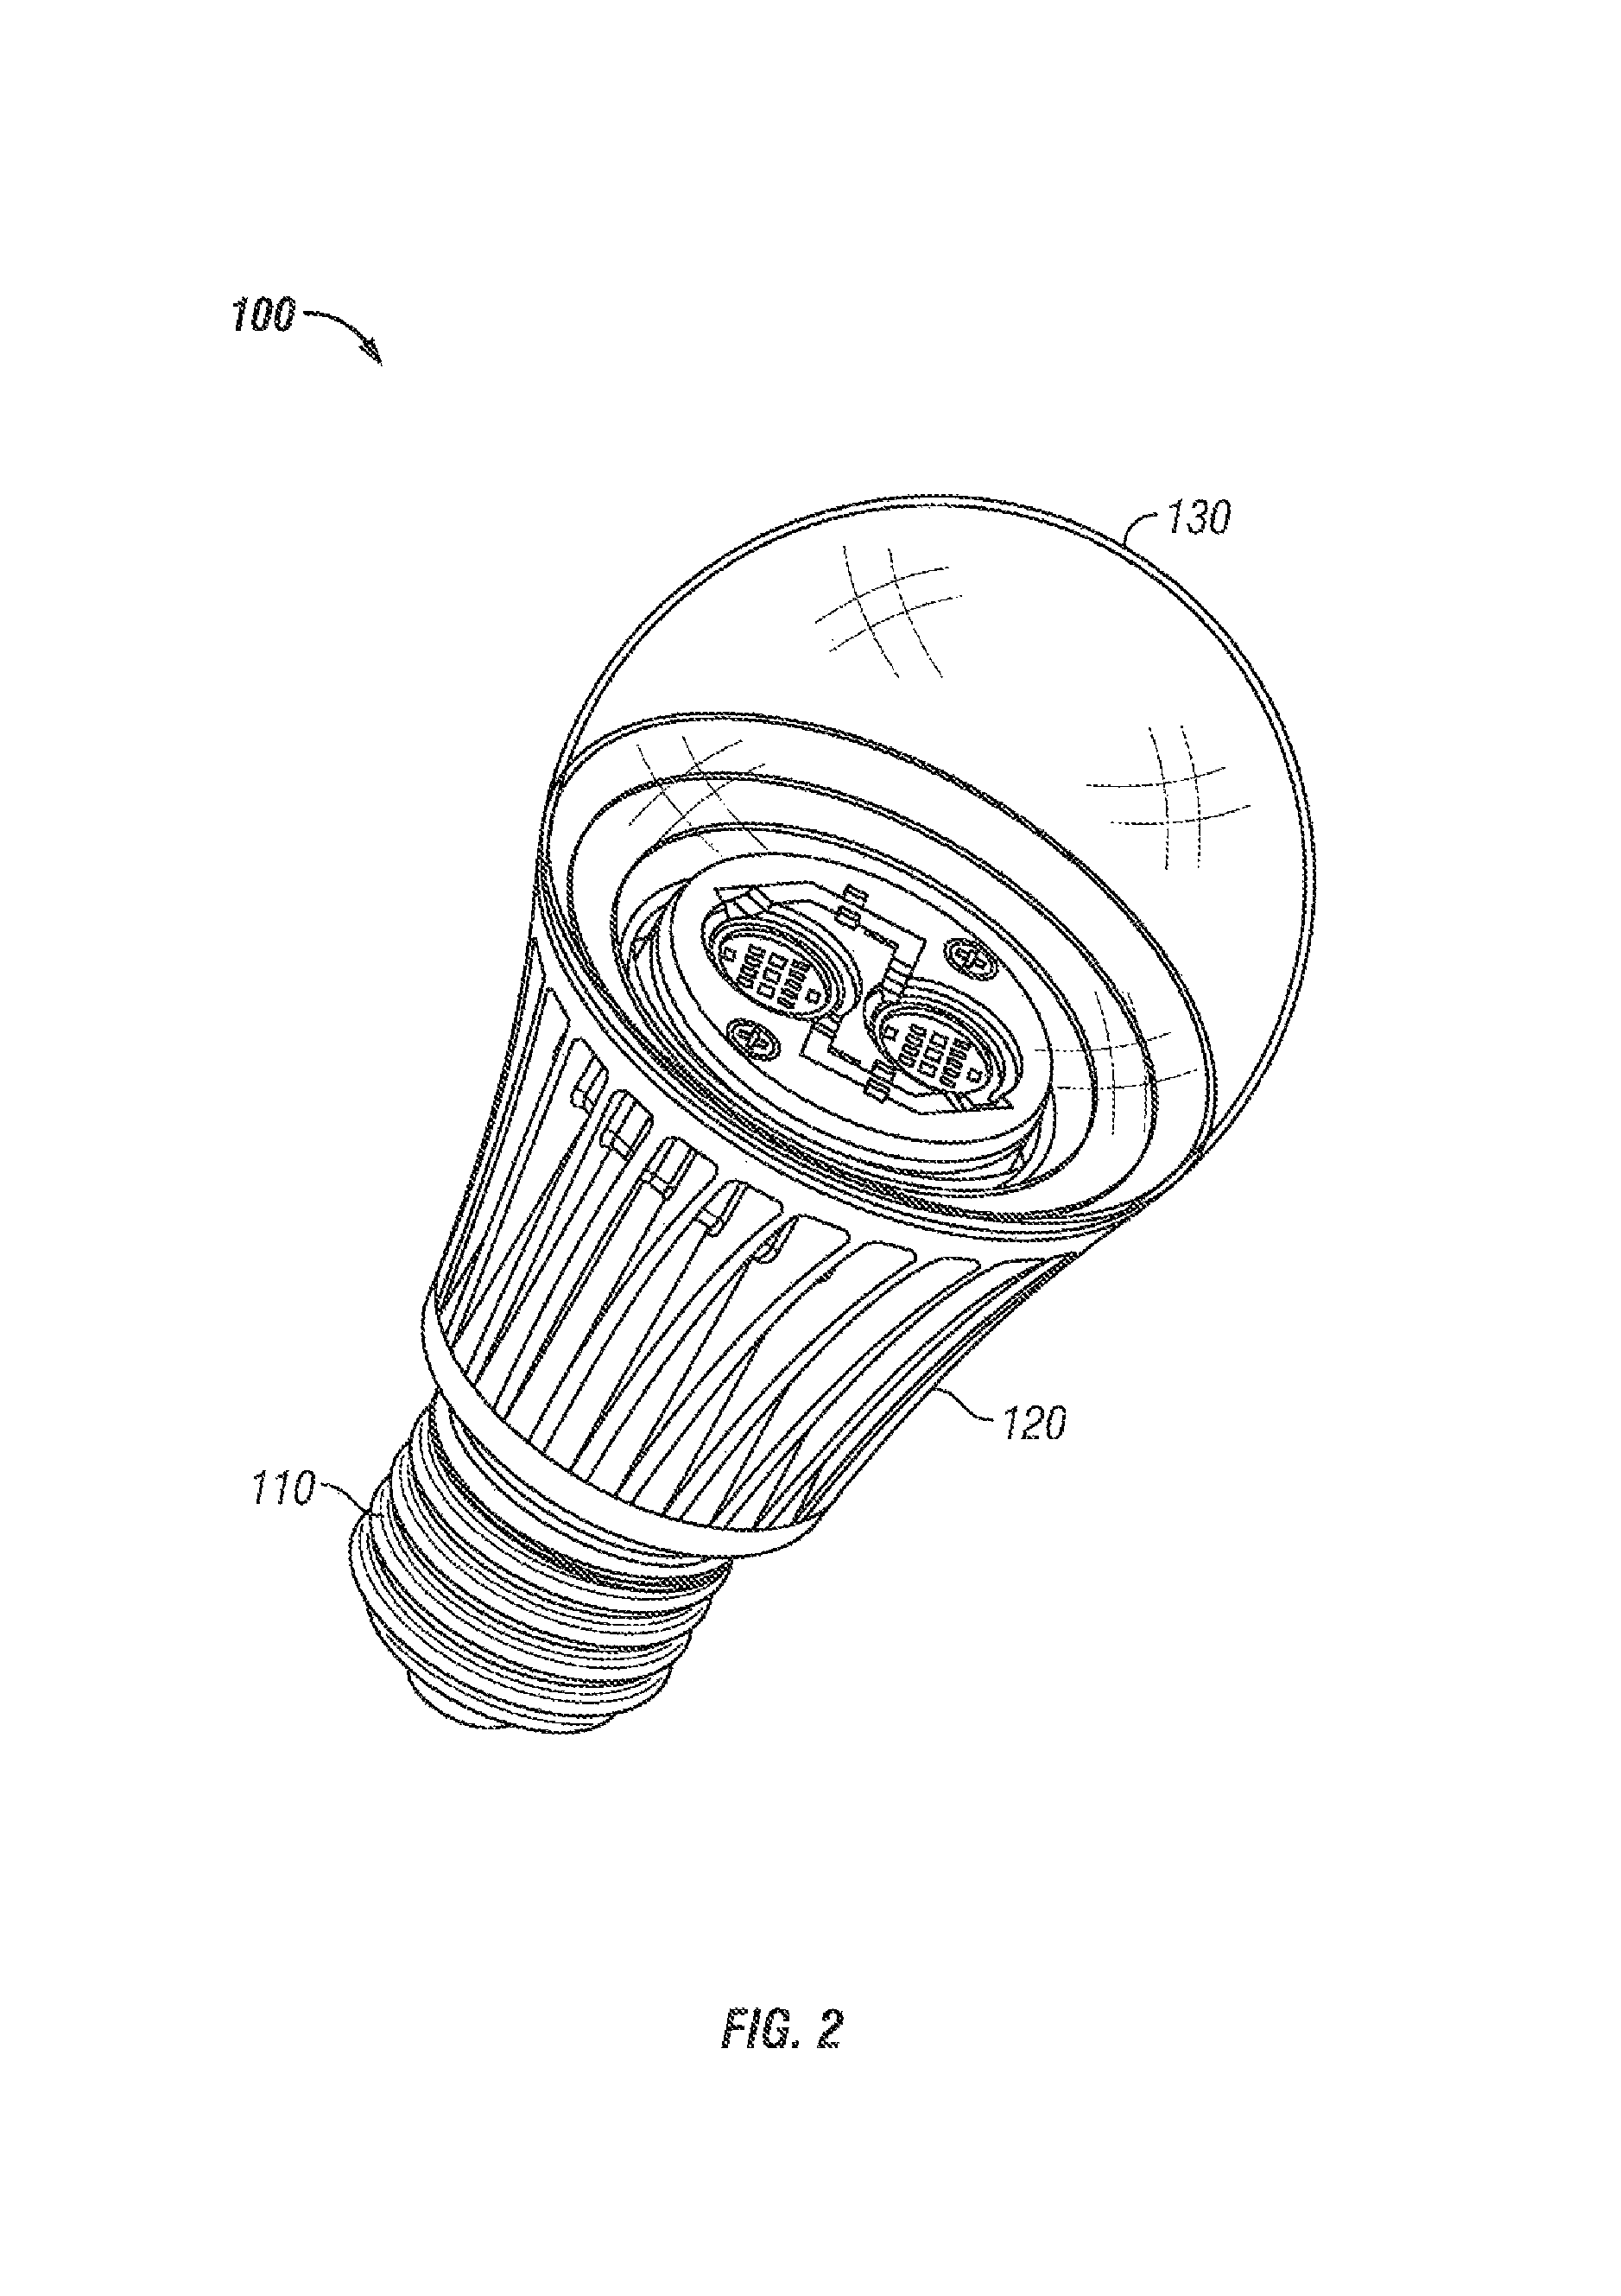 LED lamp for producing biologically-corrected light